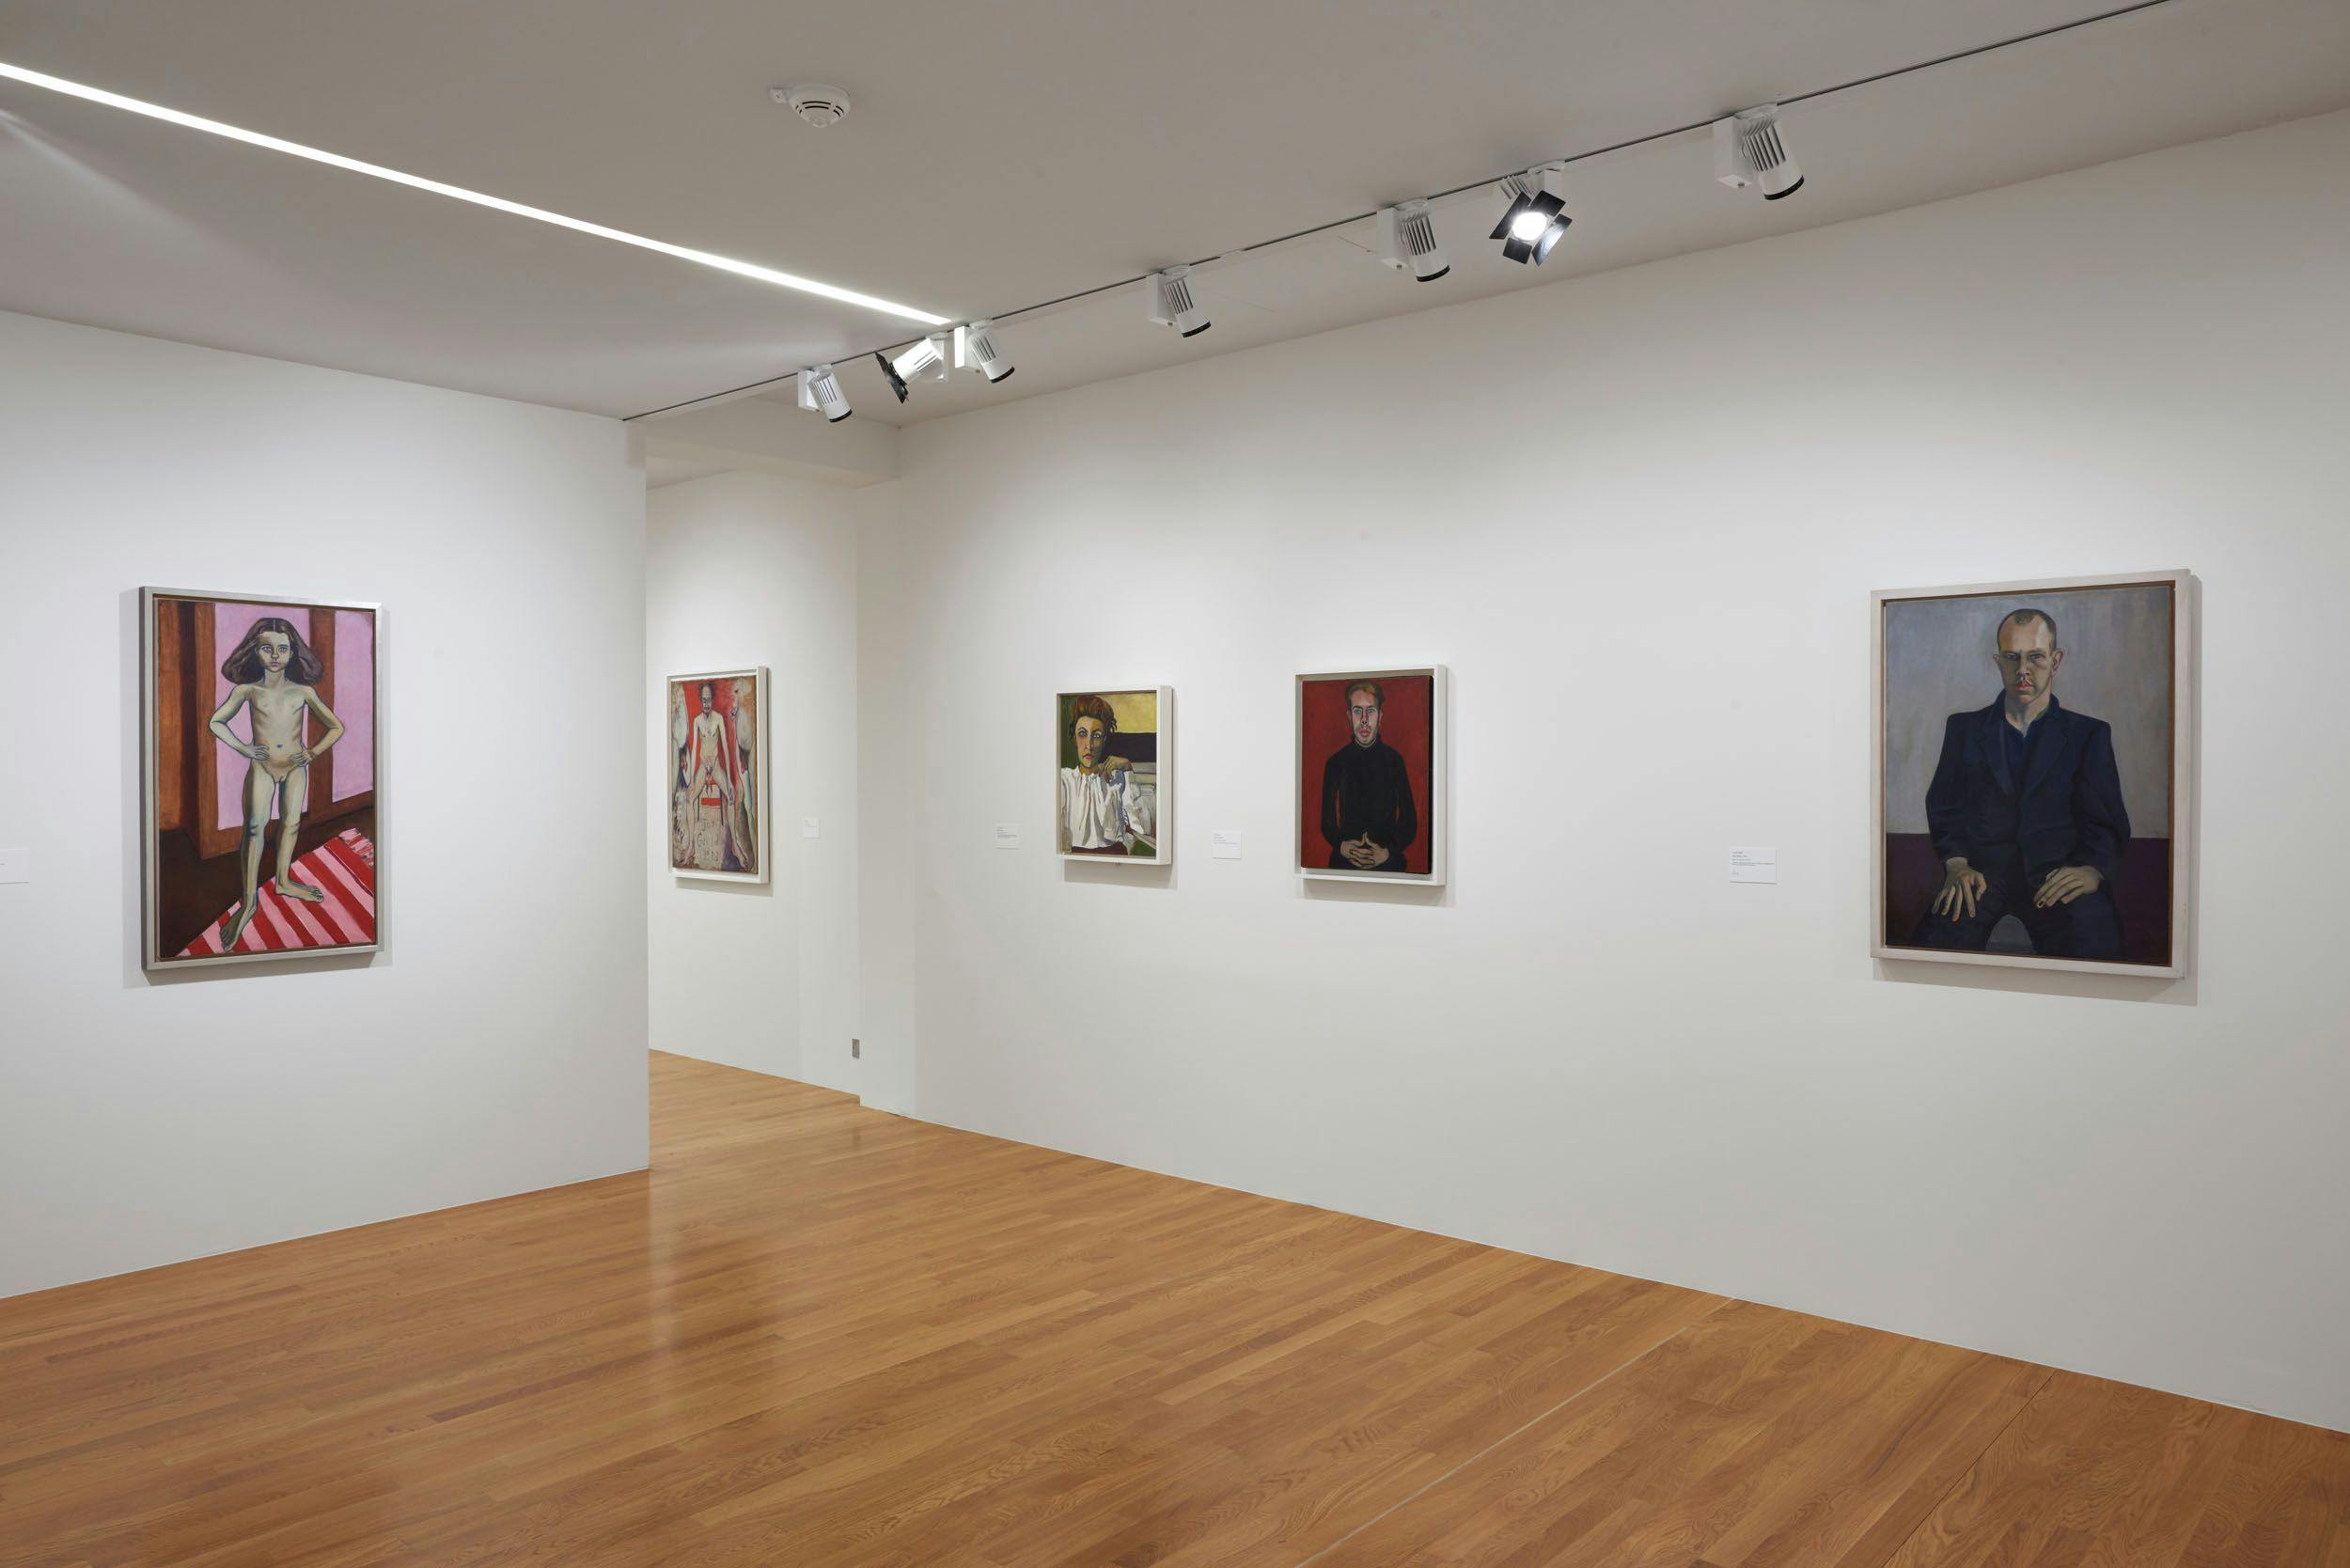 Installation view of¬†the solo exhibition Alice Neel: Painter of Modern Life,¬†at the¬†Fondation Vincent van Gogh in Arles, France, dated 2017.